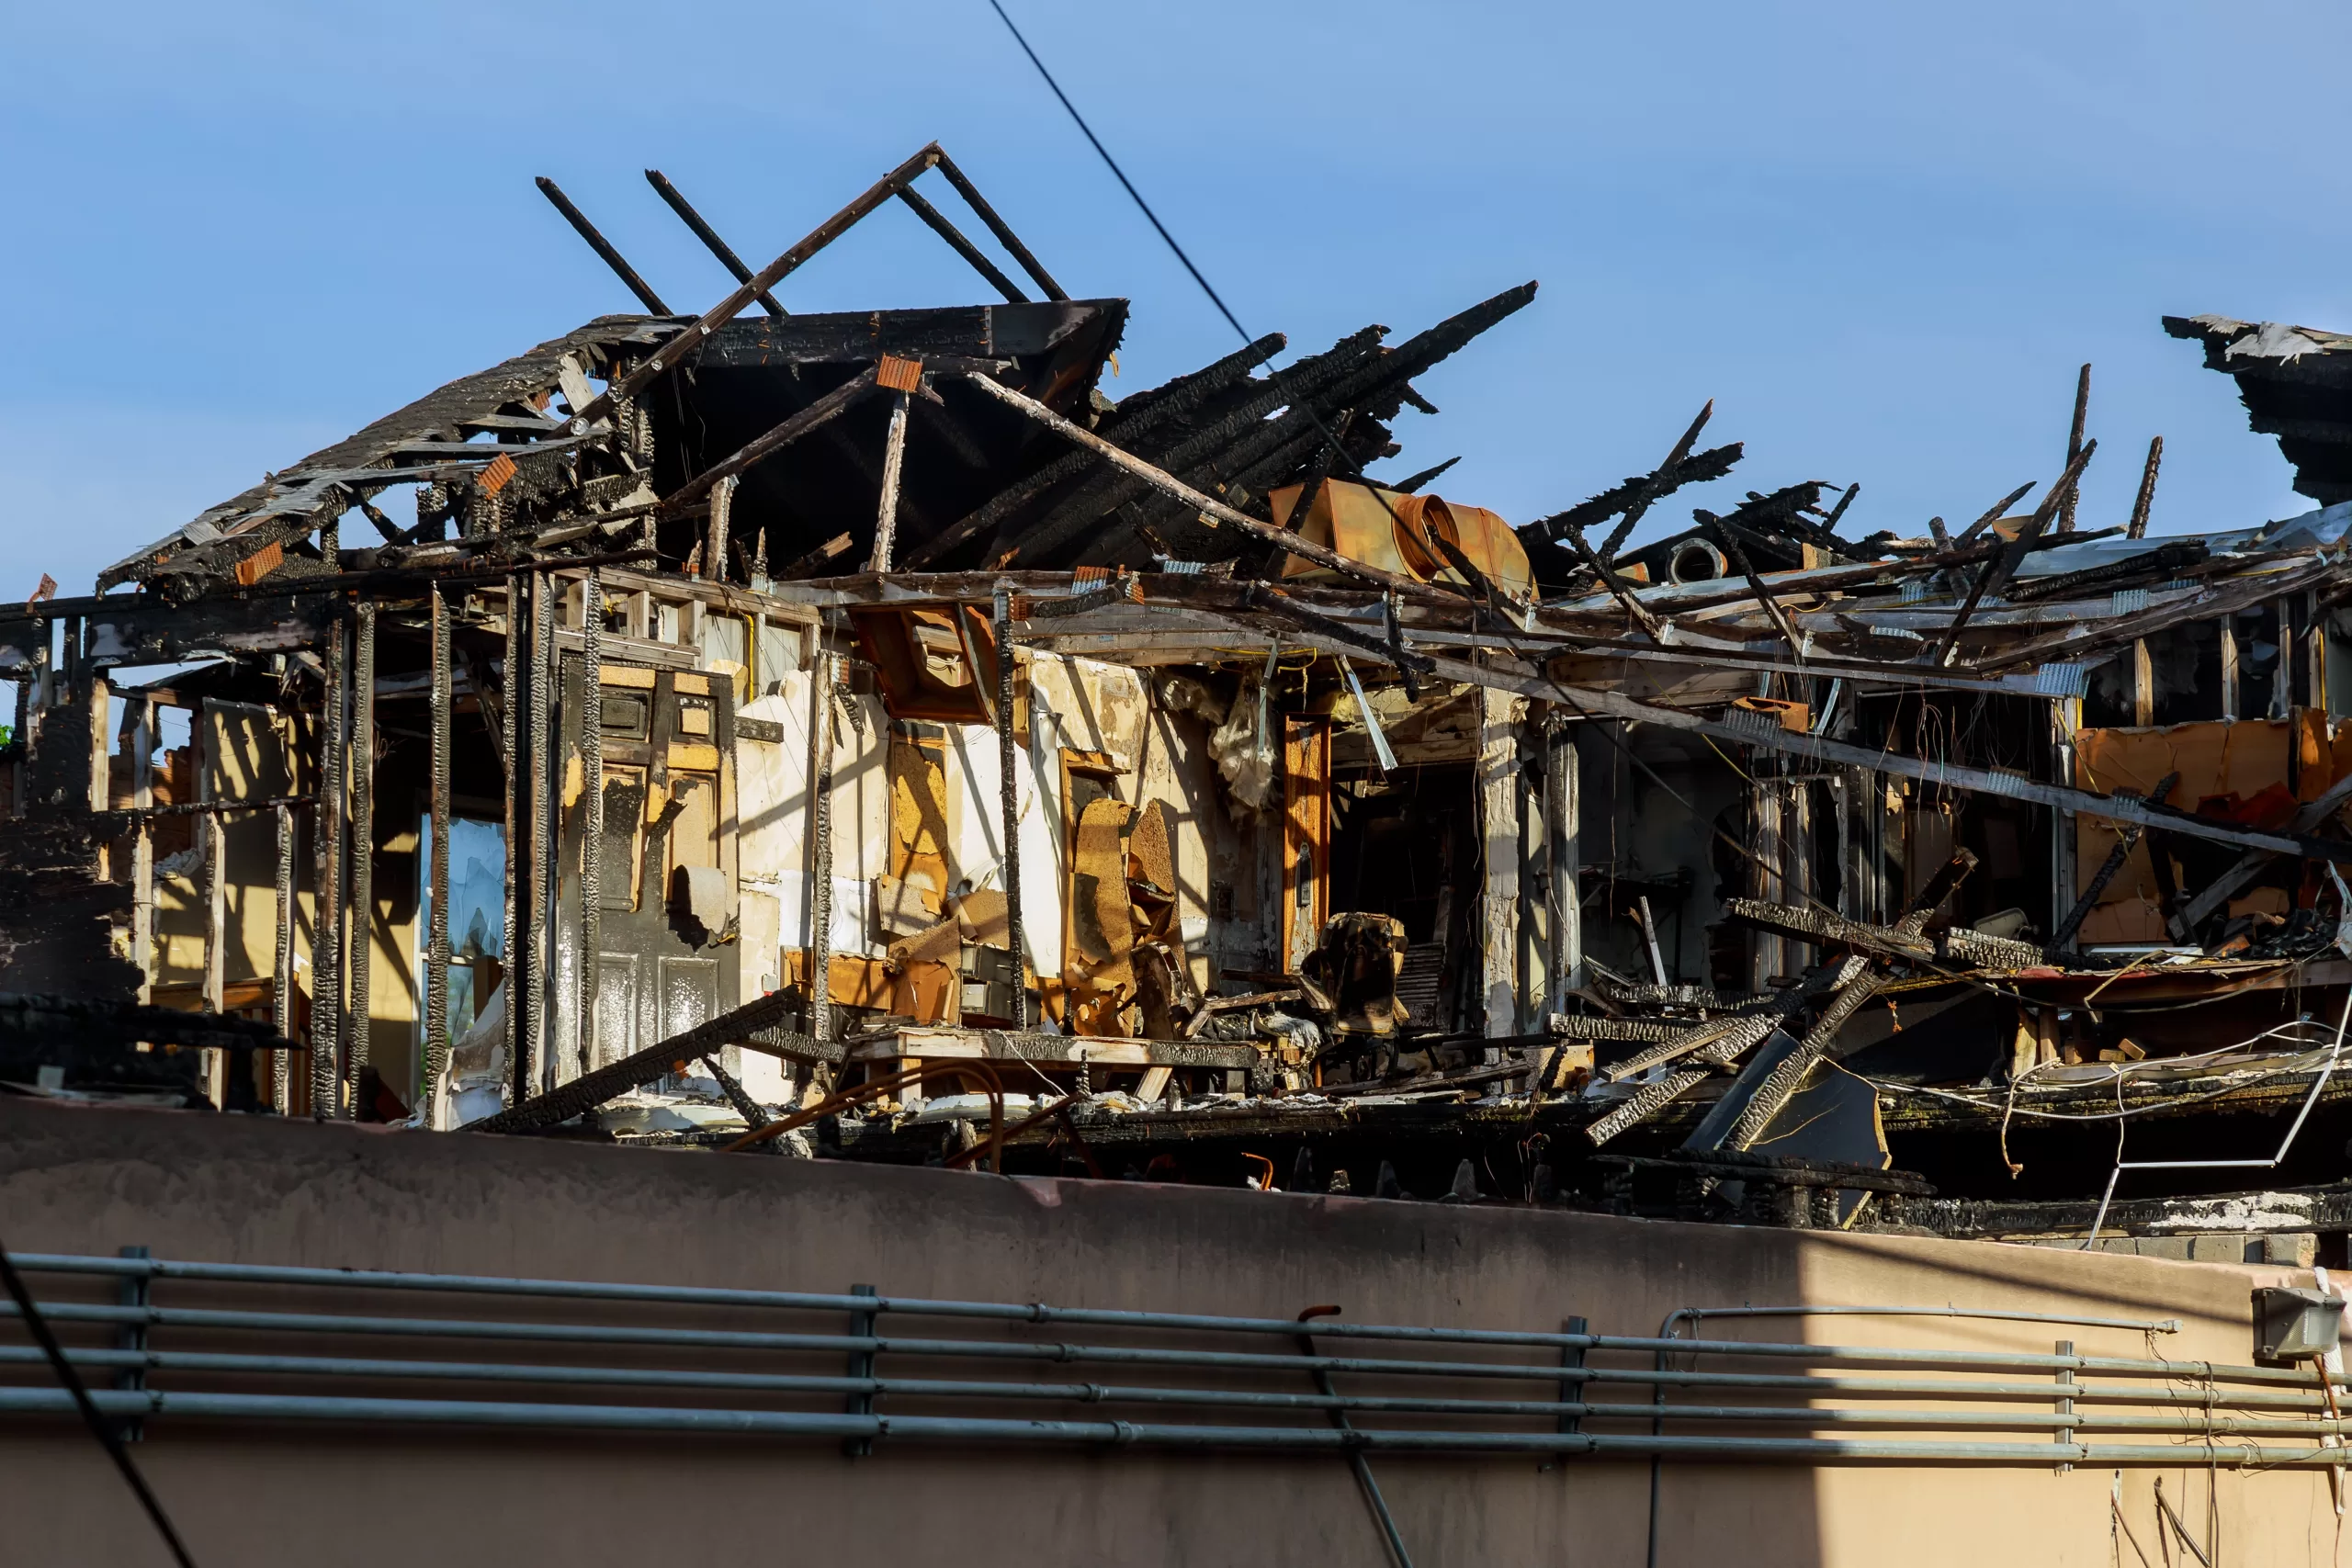 Fire Damage Restoration: Need Help With the Insurance Claims Process? OTM Restoration can help you file your insurance claim and restore your property.